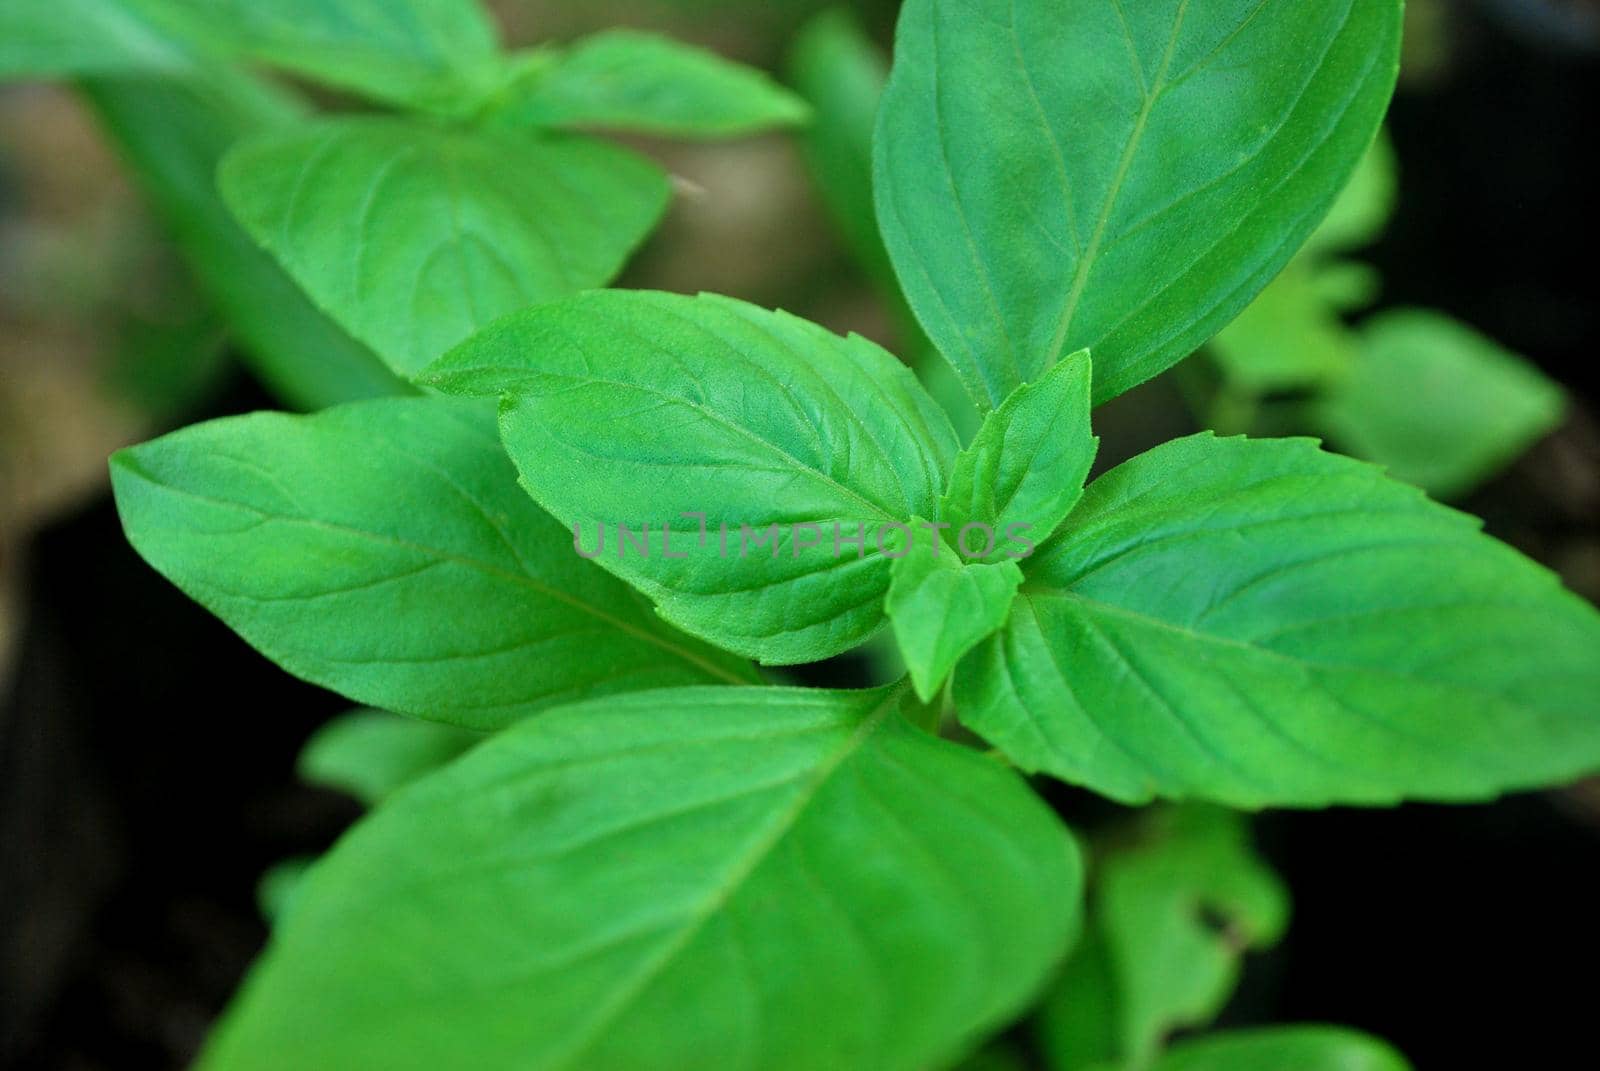 Basil is an important plant for food.